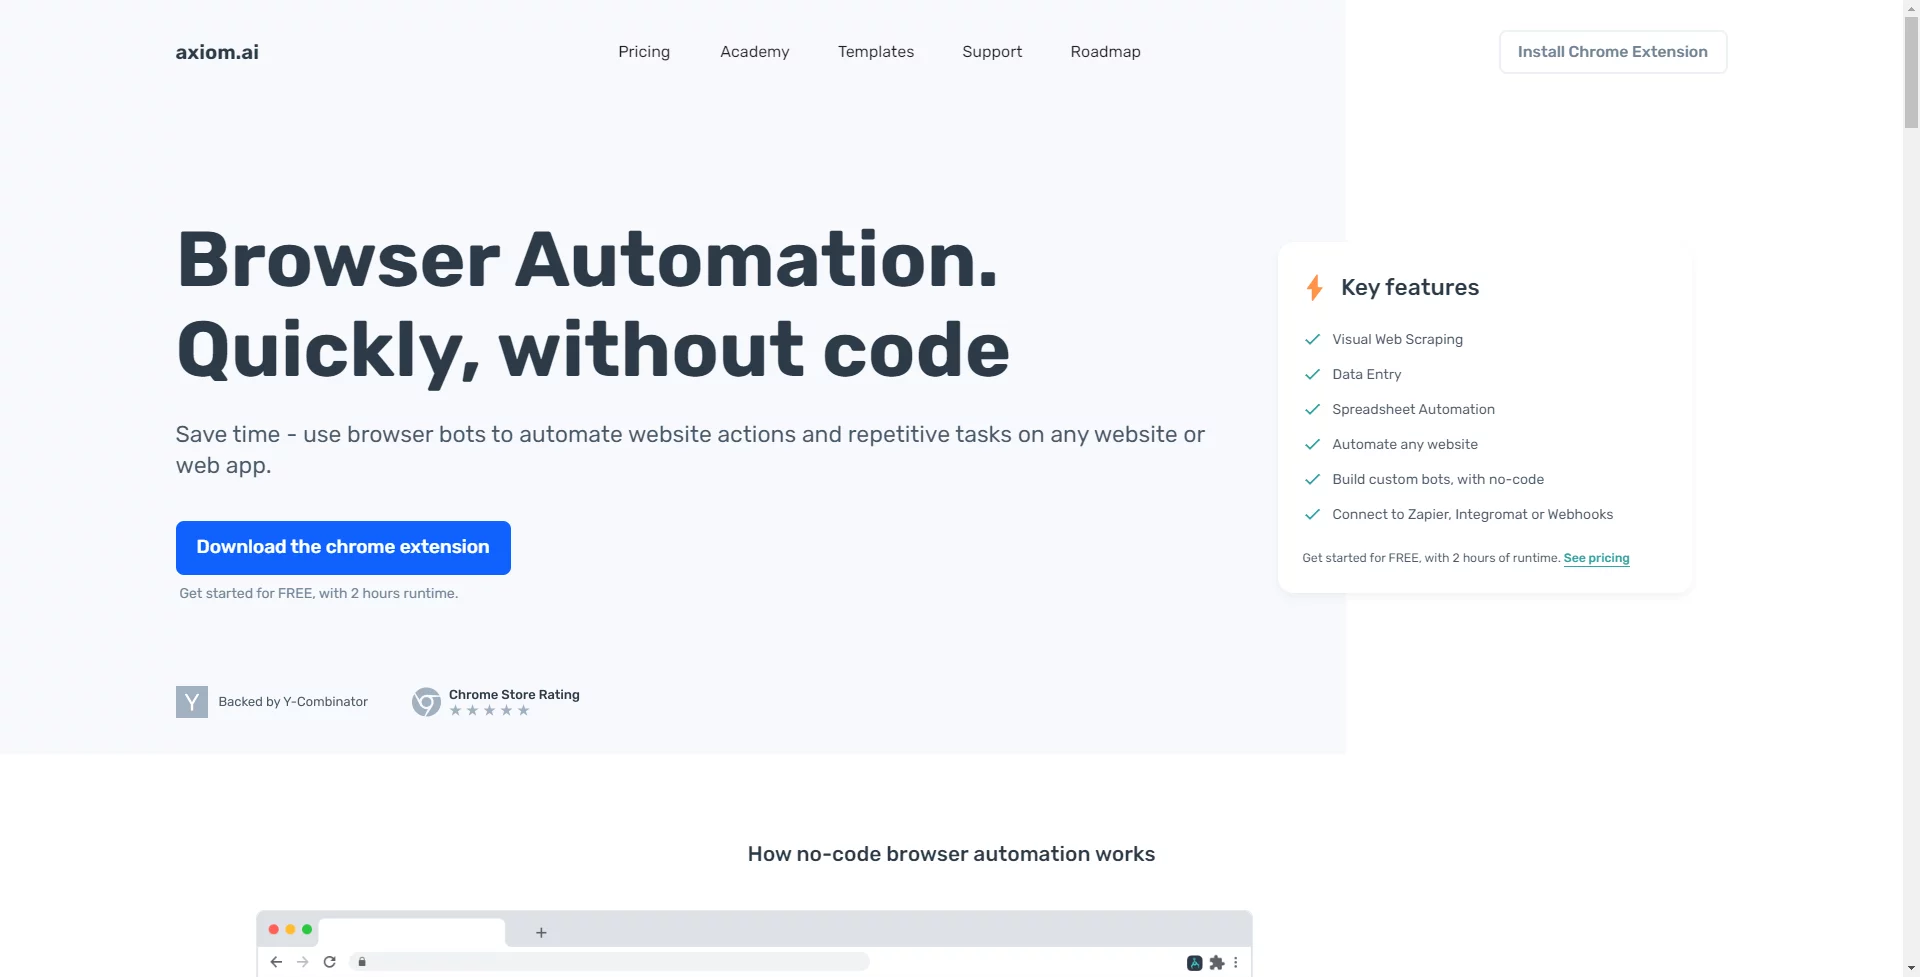  Axiom automates website actions & repetitive